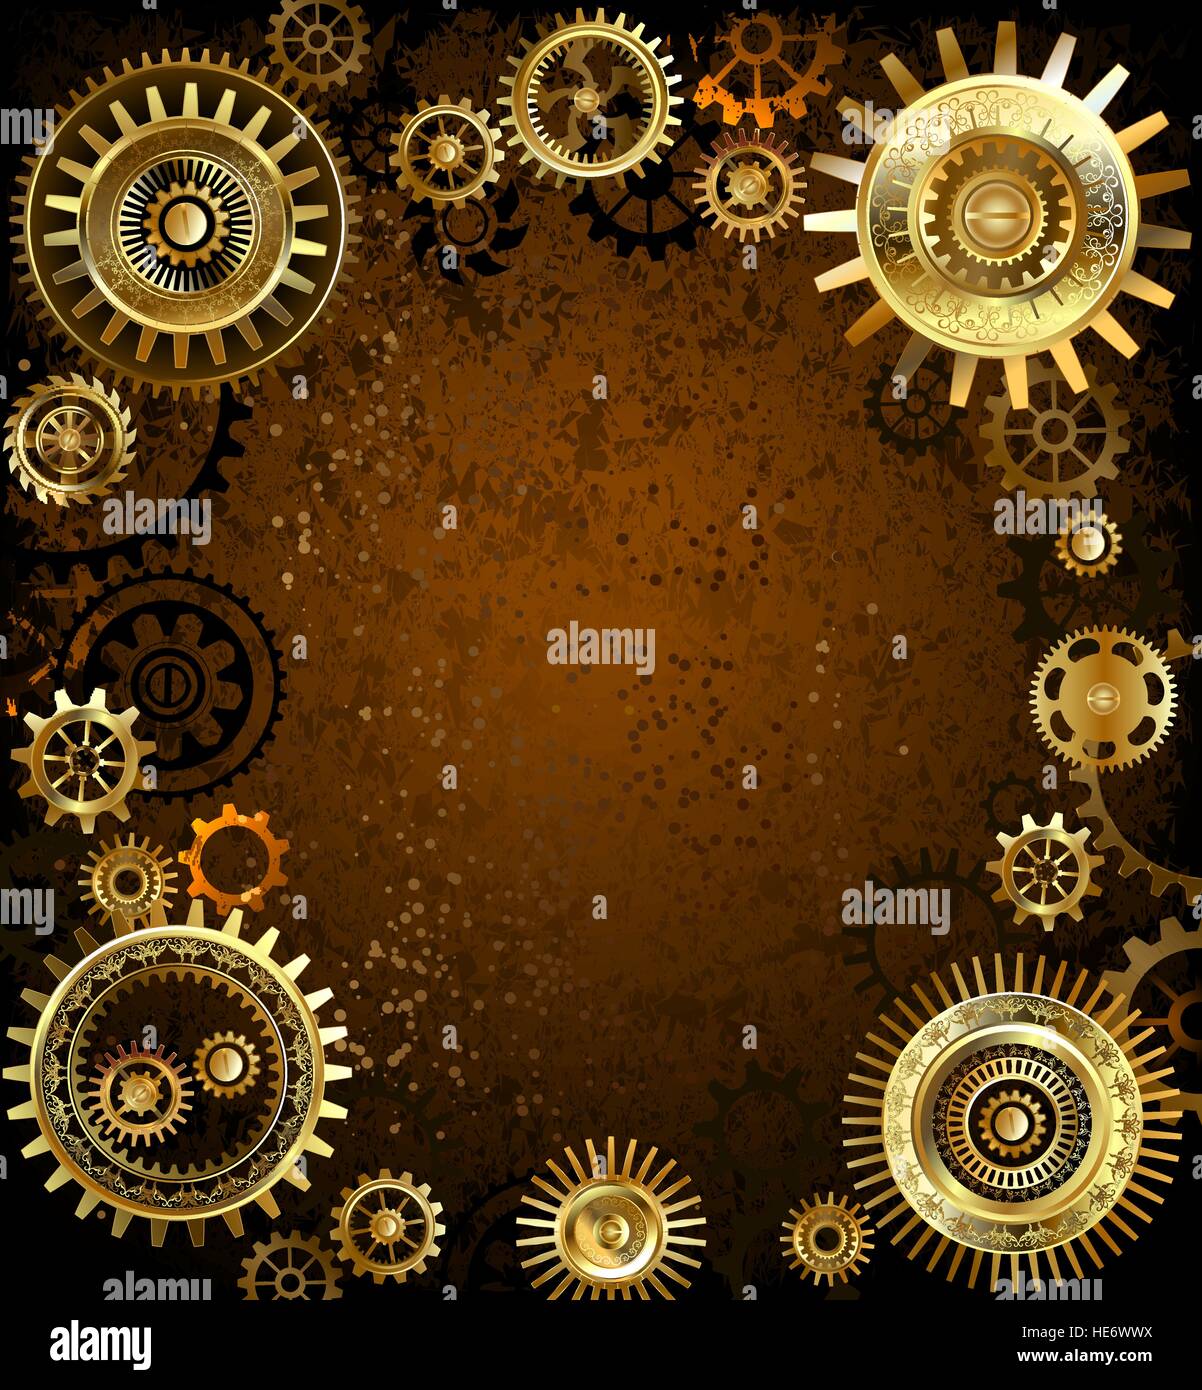 gold and brass gears on rusty background. Stock Vector